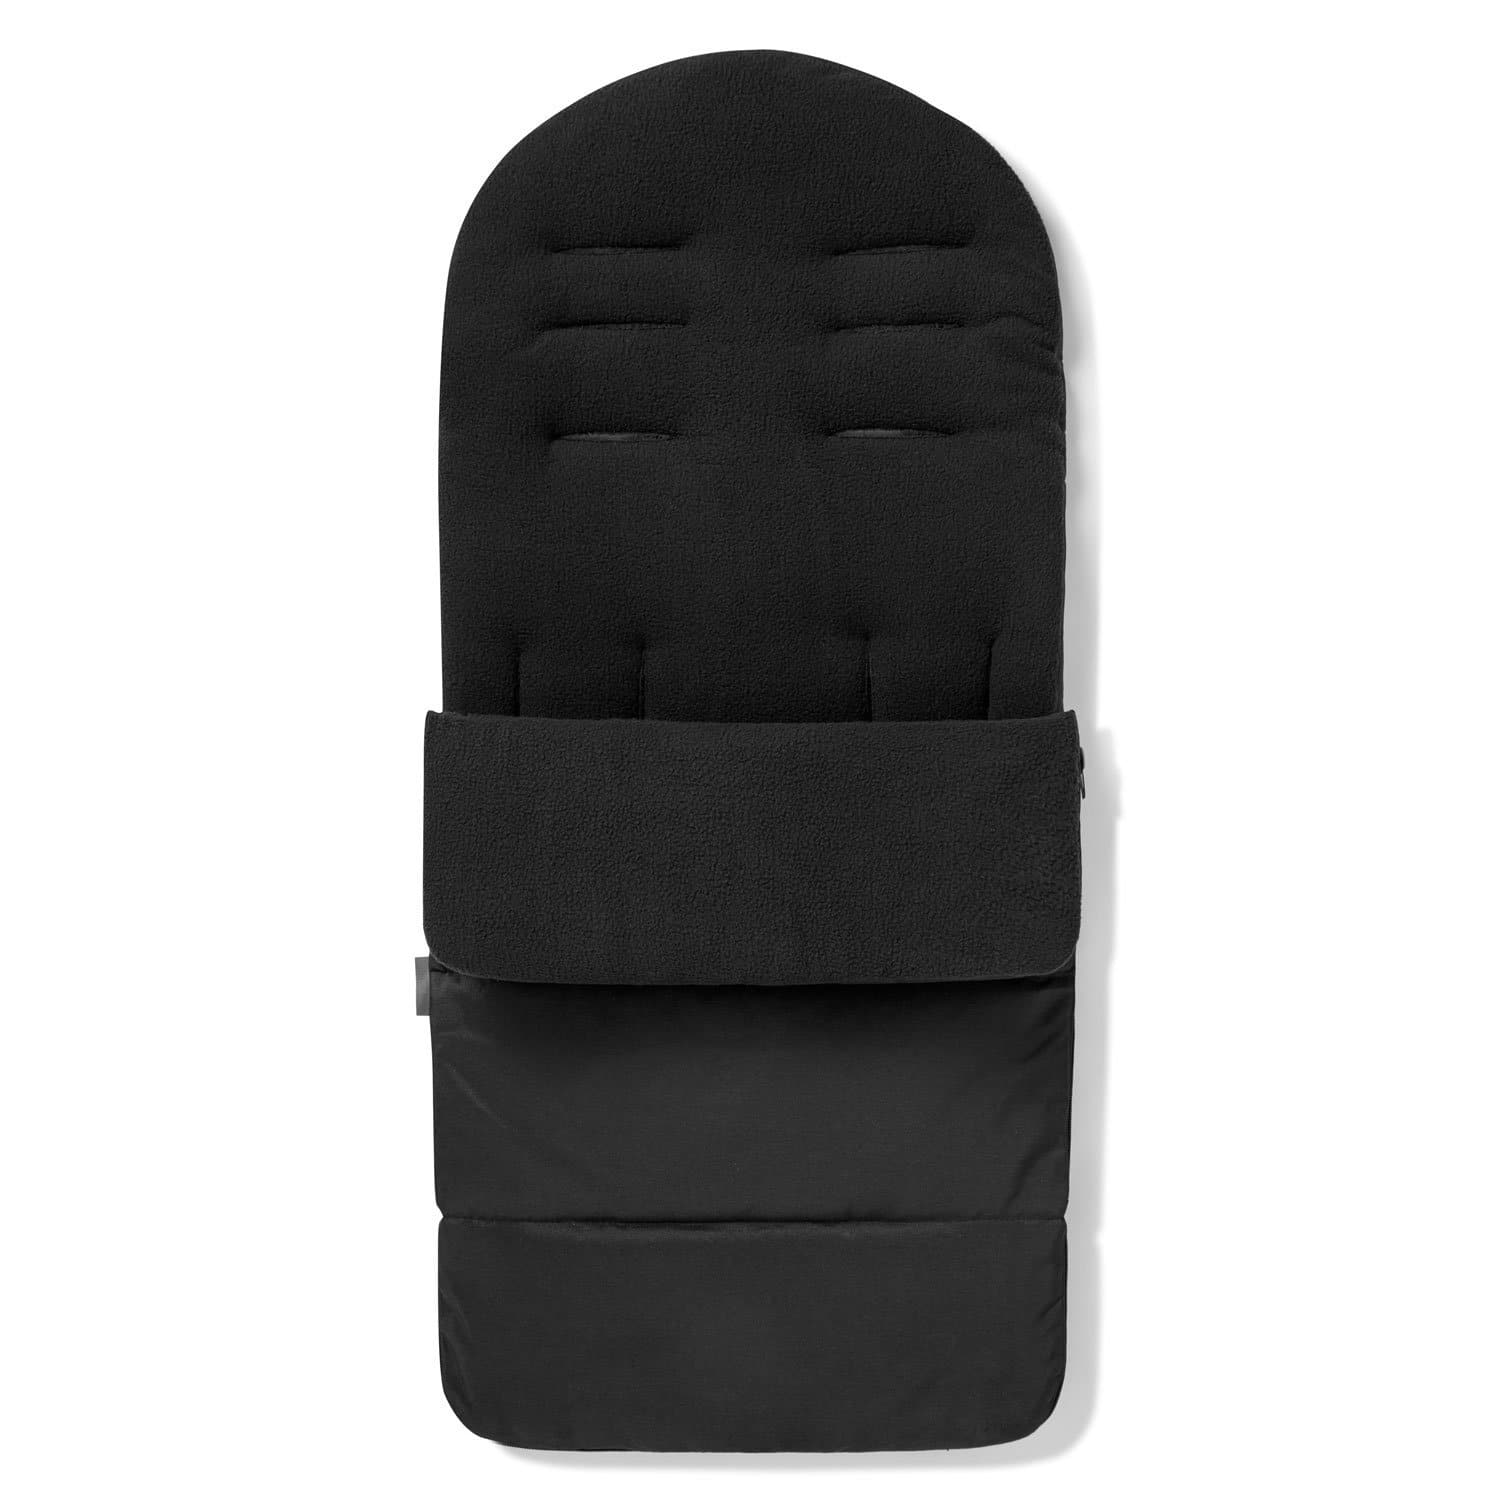 Premium Footmuff / Cosy Toes Compatible with Babylo - Black Jack / Fits All Models | For Your Little One